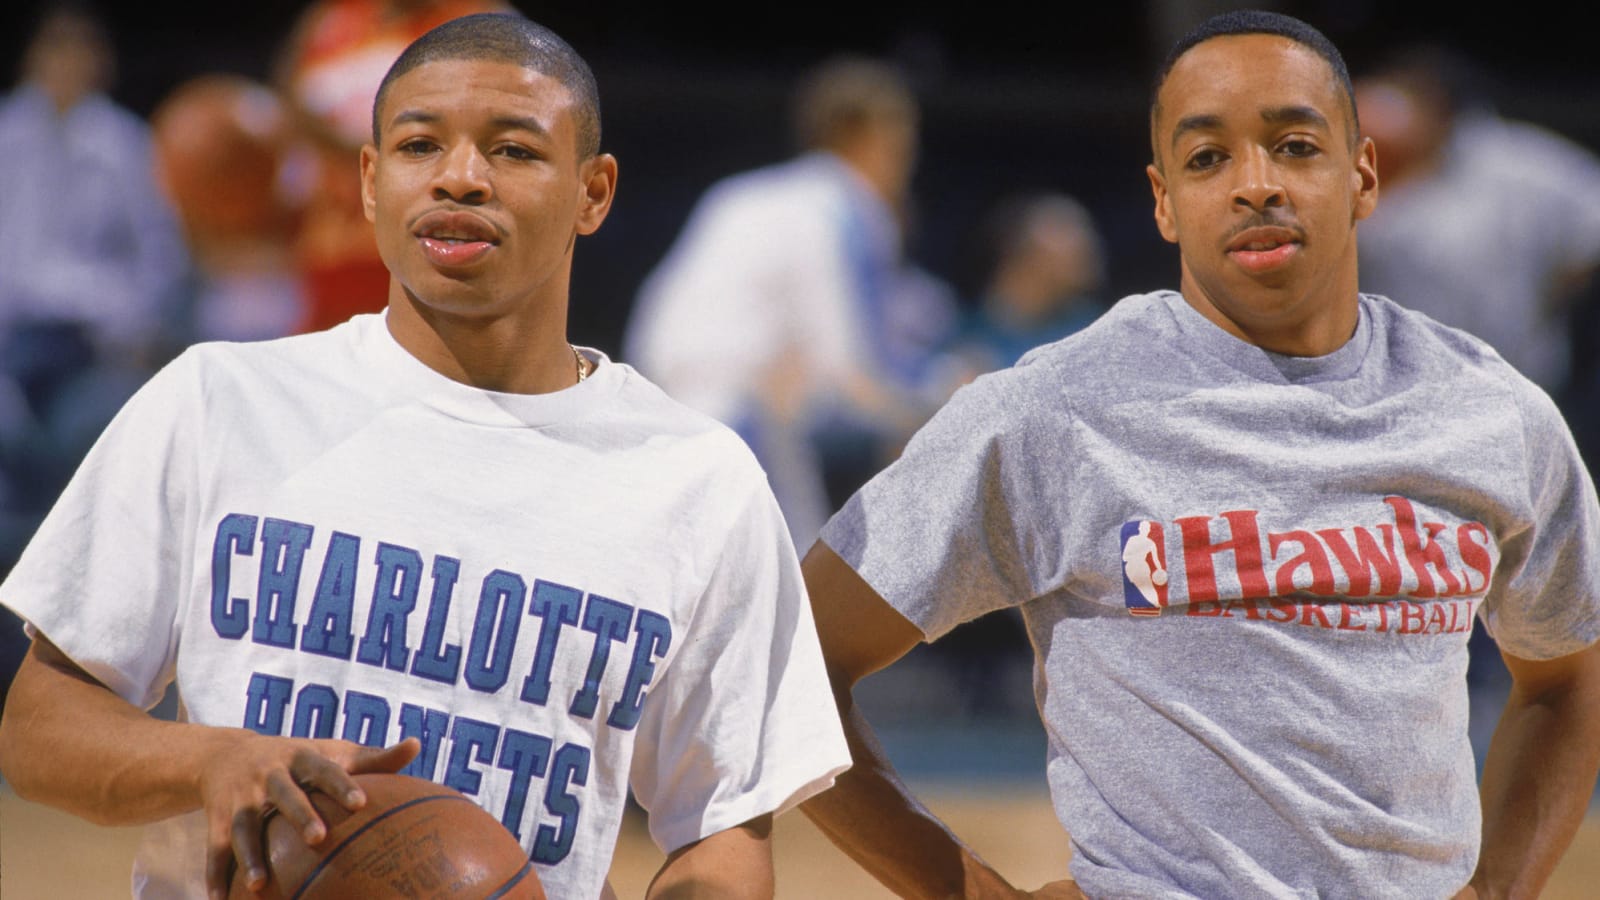 The shortest players in NBA history